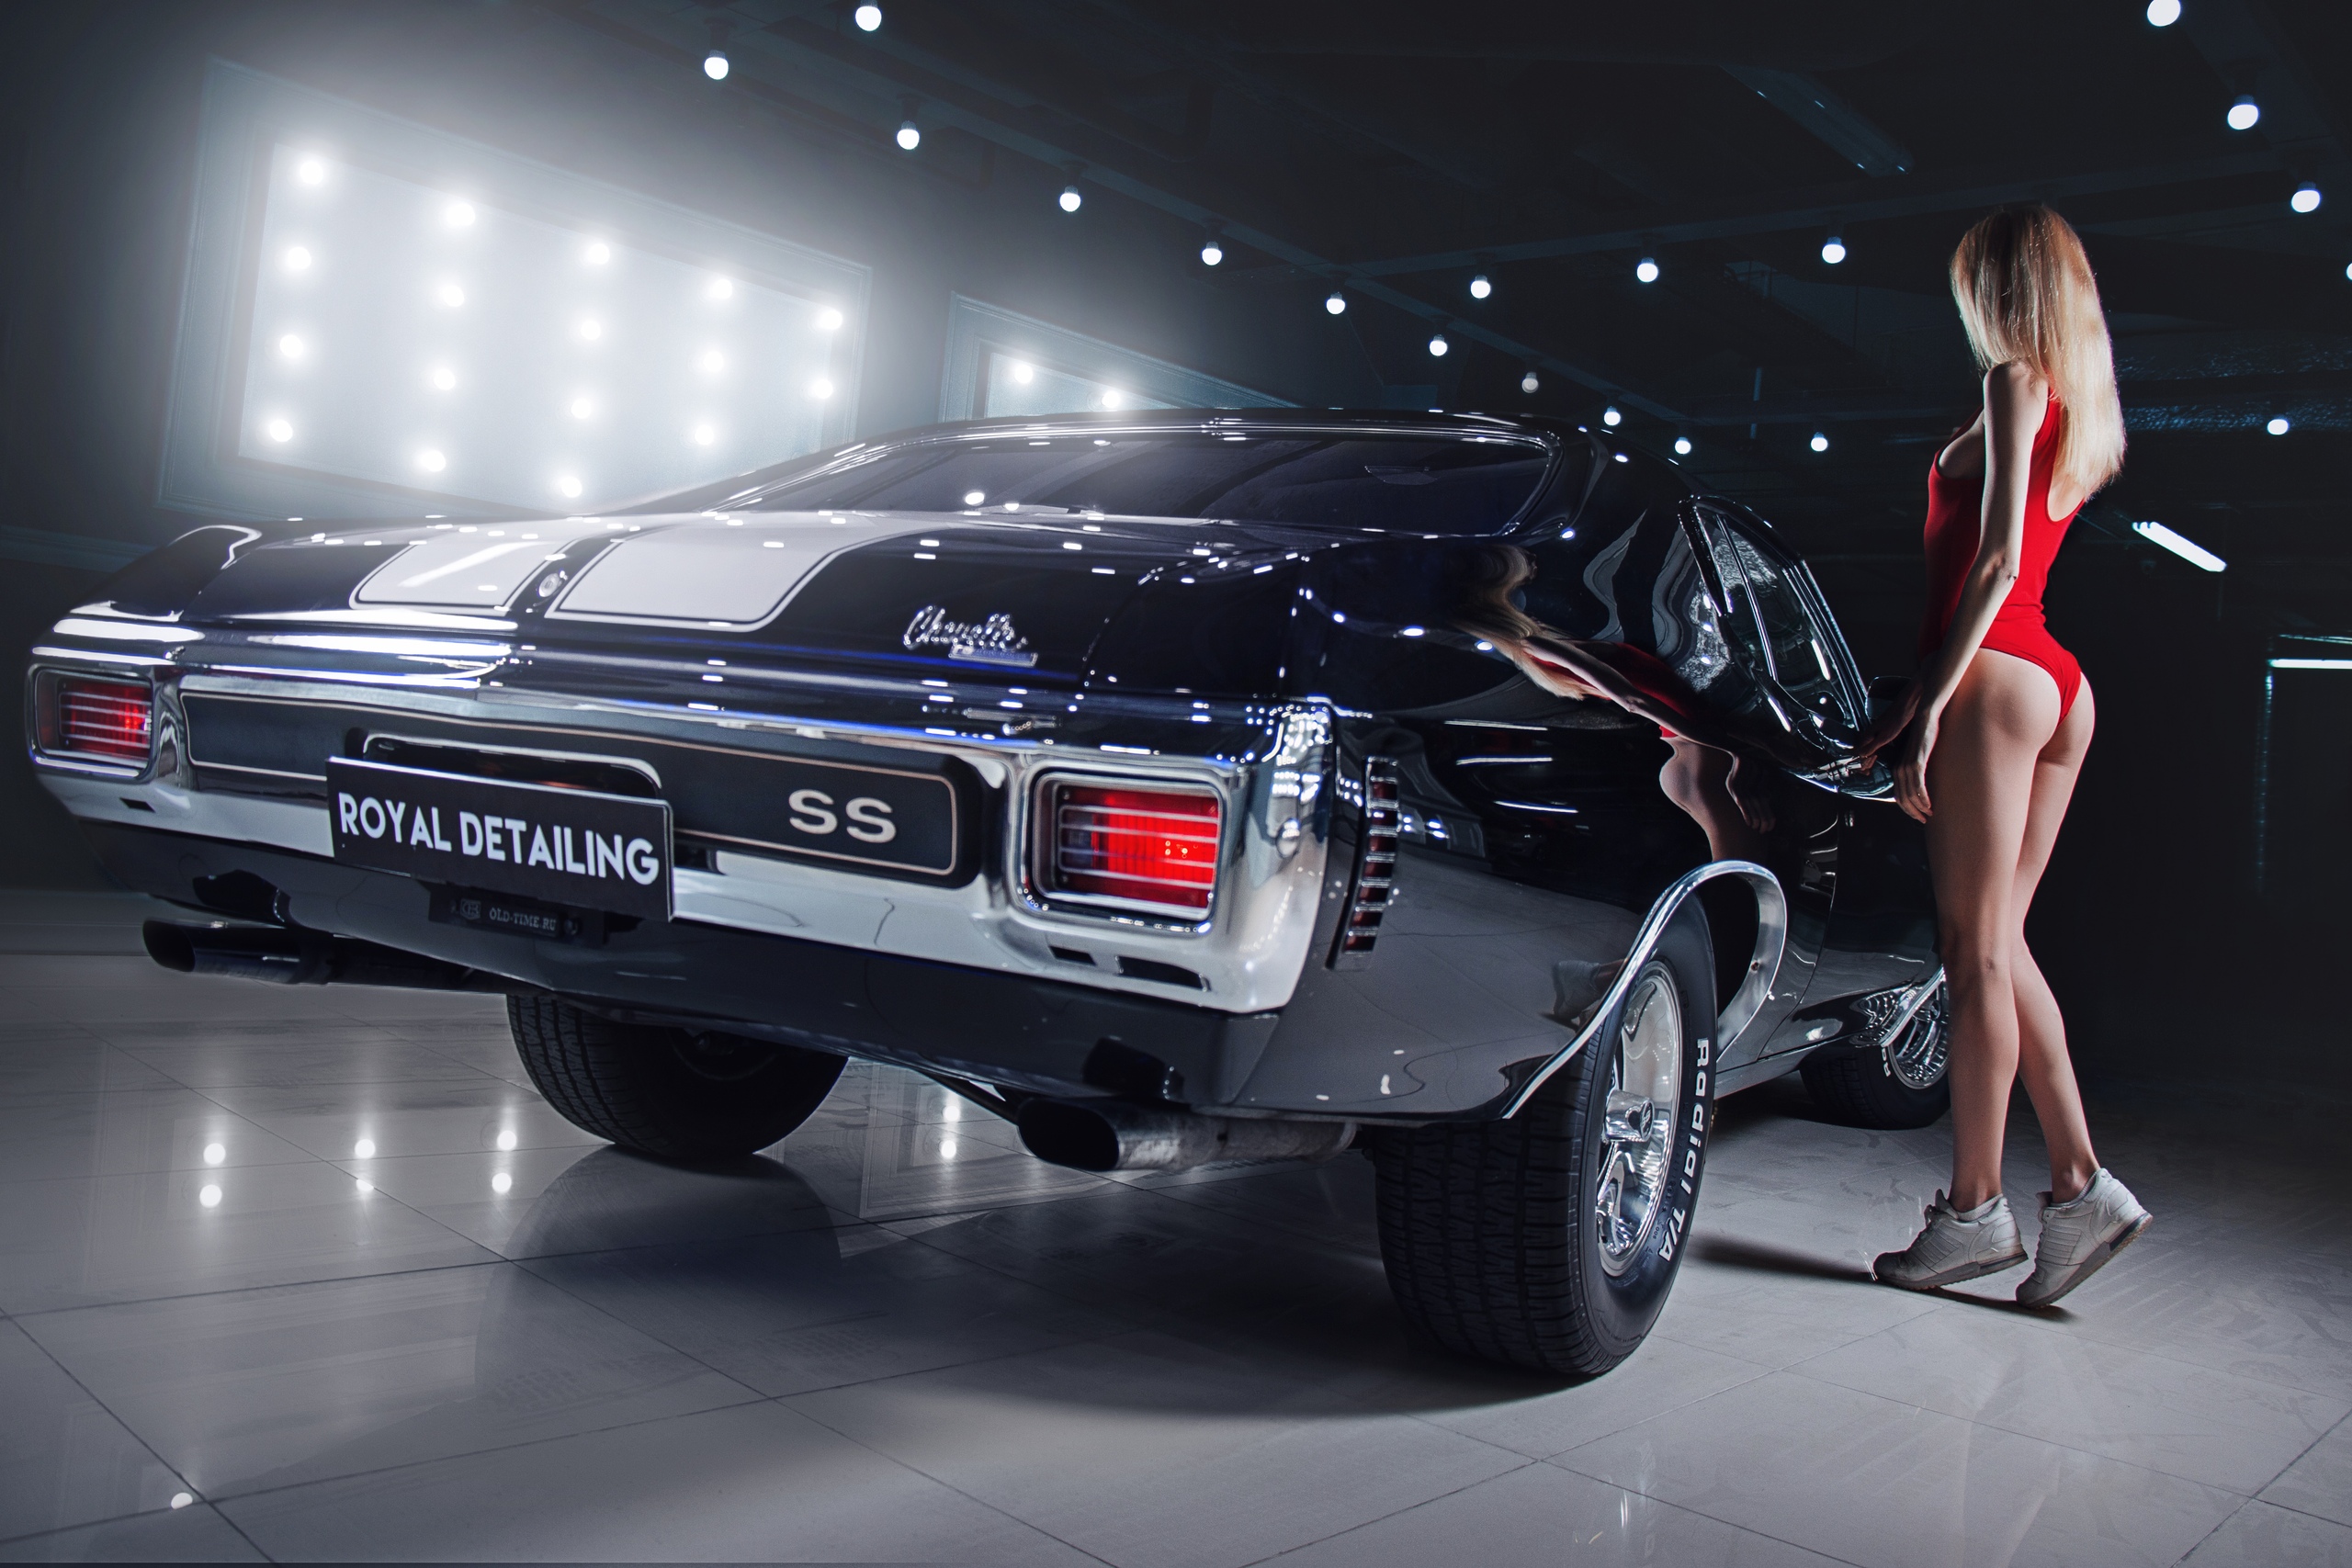 People 2560x1707 women model blonde bodysuit ass car women with cars Chevelle SS muscle cars racing stripes rear view standing Chevrolet Chevelle sneakers American cars taillights lights floor long hair vehicle licence plates reflection